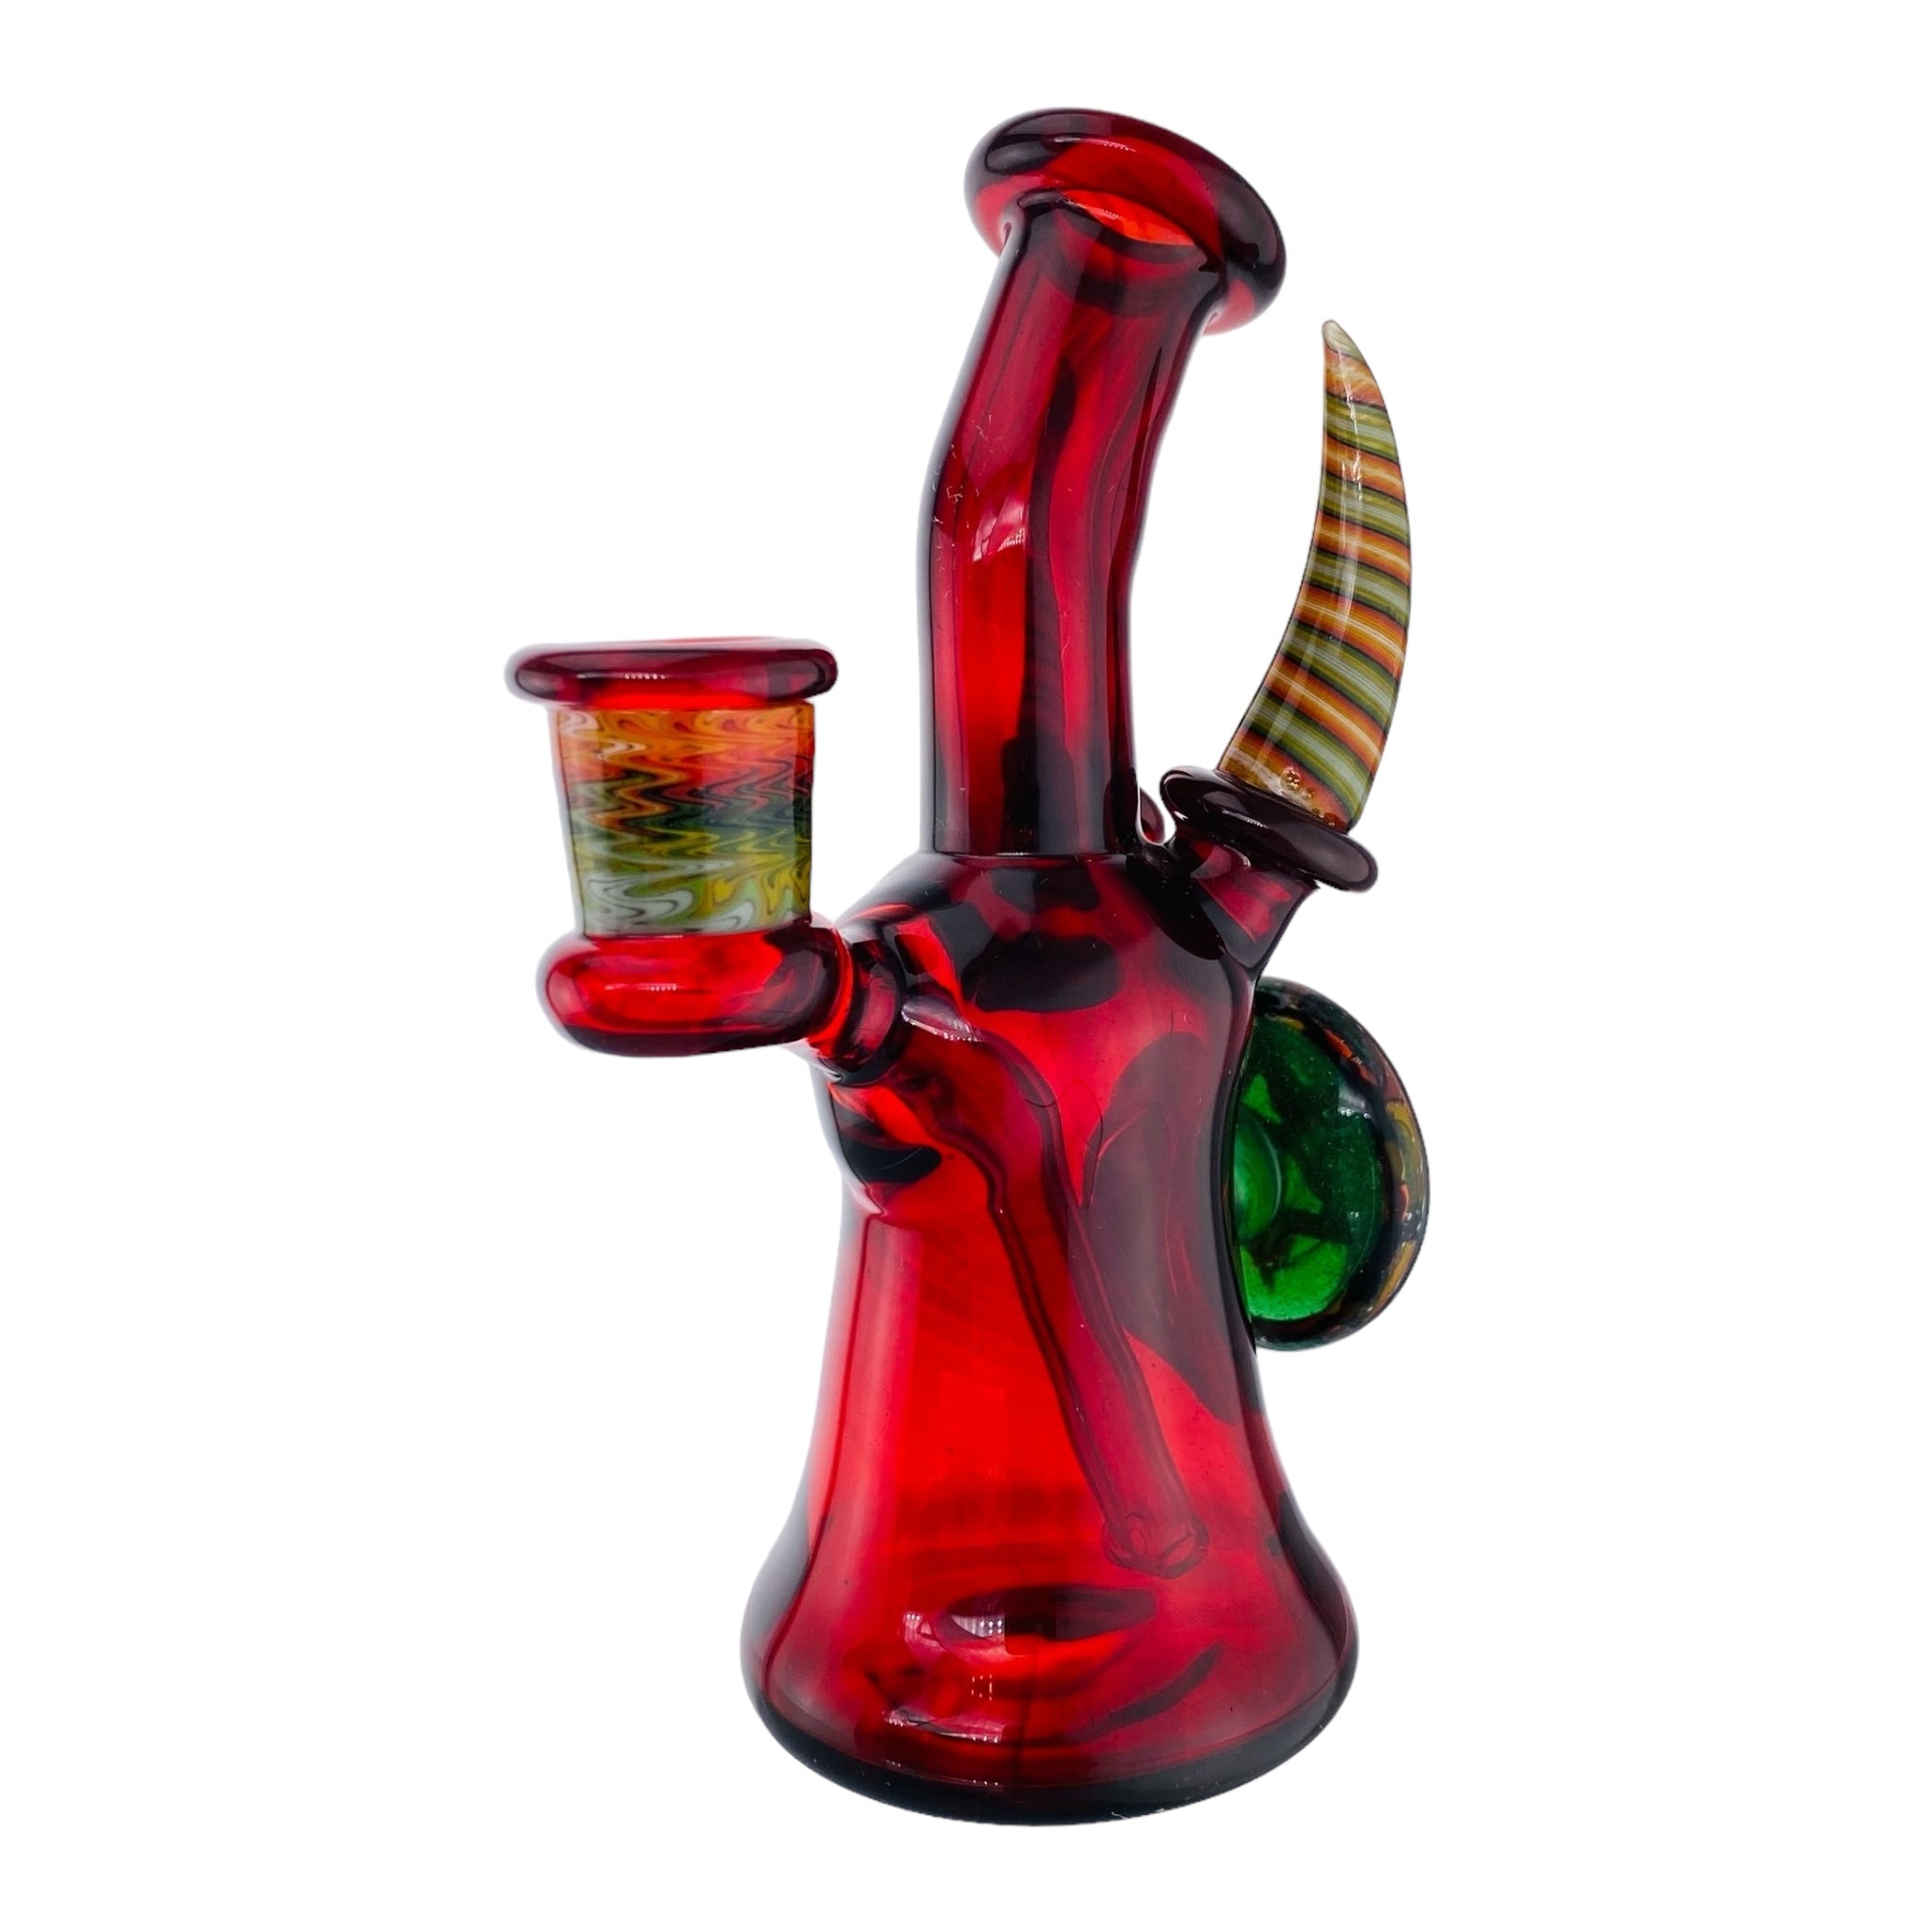 heady bong or dab rig or hash and weed by Ty Watts Glass Pomegranate Banger Hanger With Bucket Set